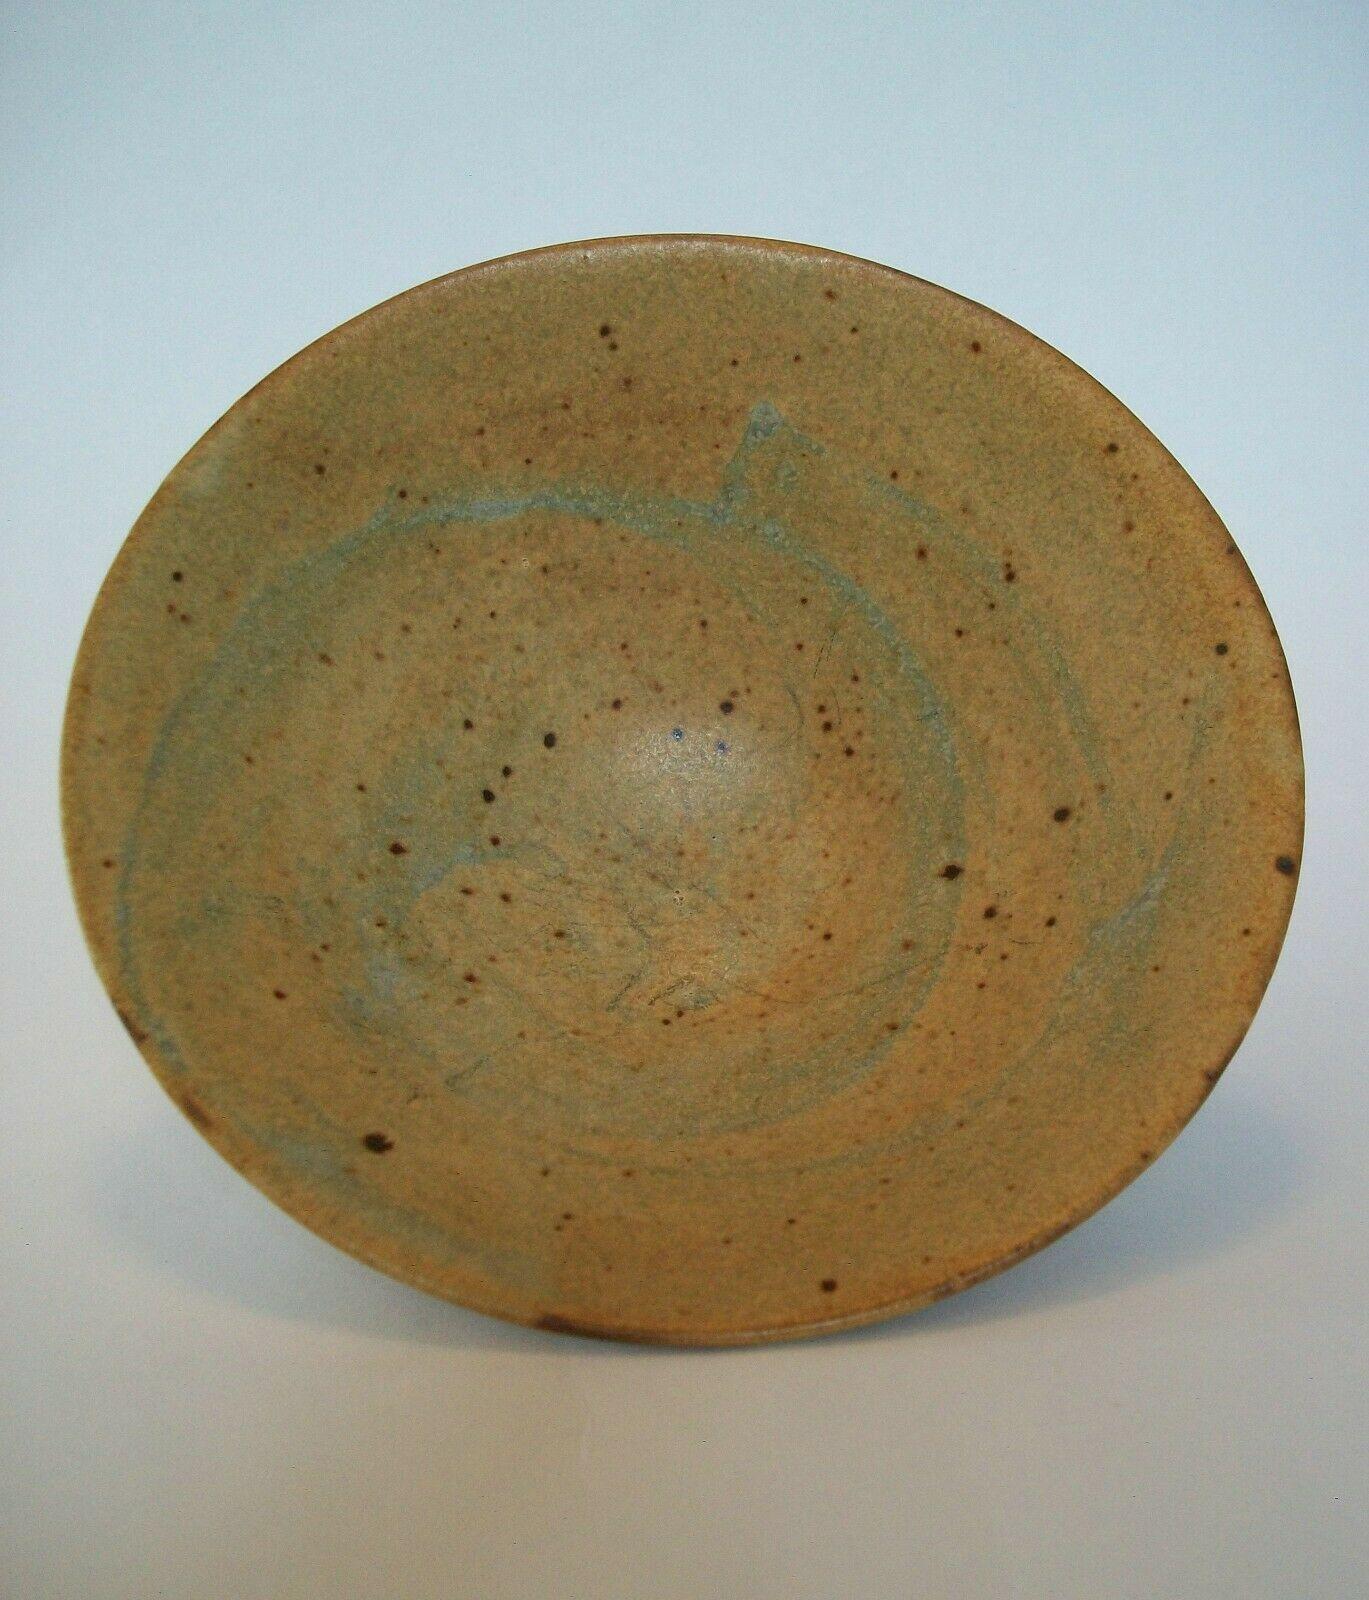 Song Dynasty style Jun type ware conical ceramic bowl - matte caramel glaze with subtle celadon swirl decoration to the interior and splash decoration to the sides - 'earthworm track markings' on the surface of the glaze (with magnification) -